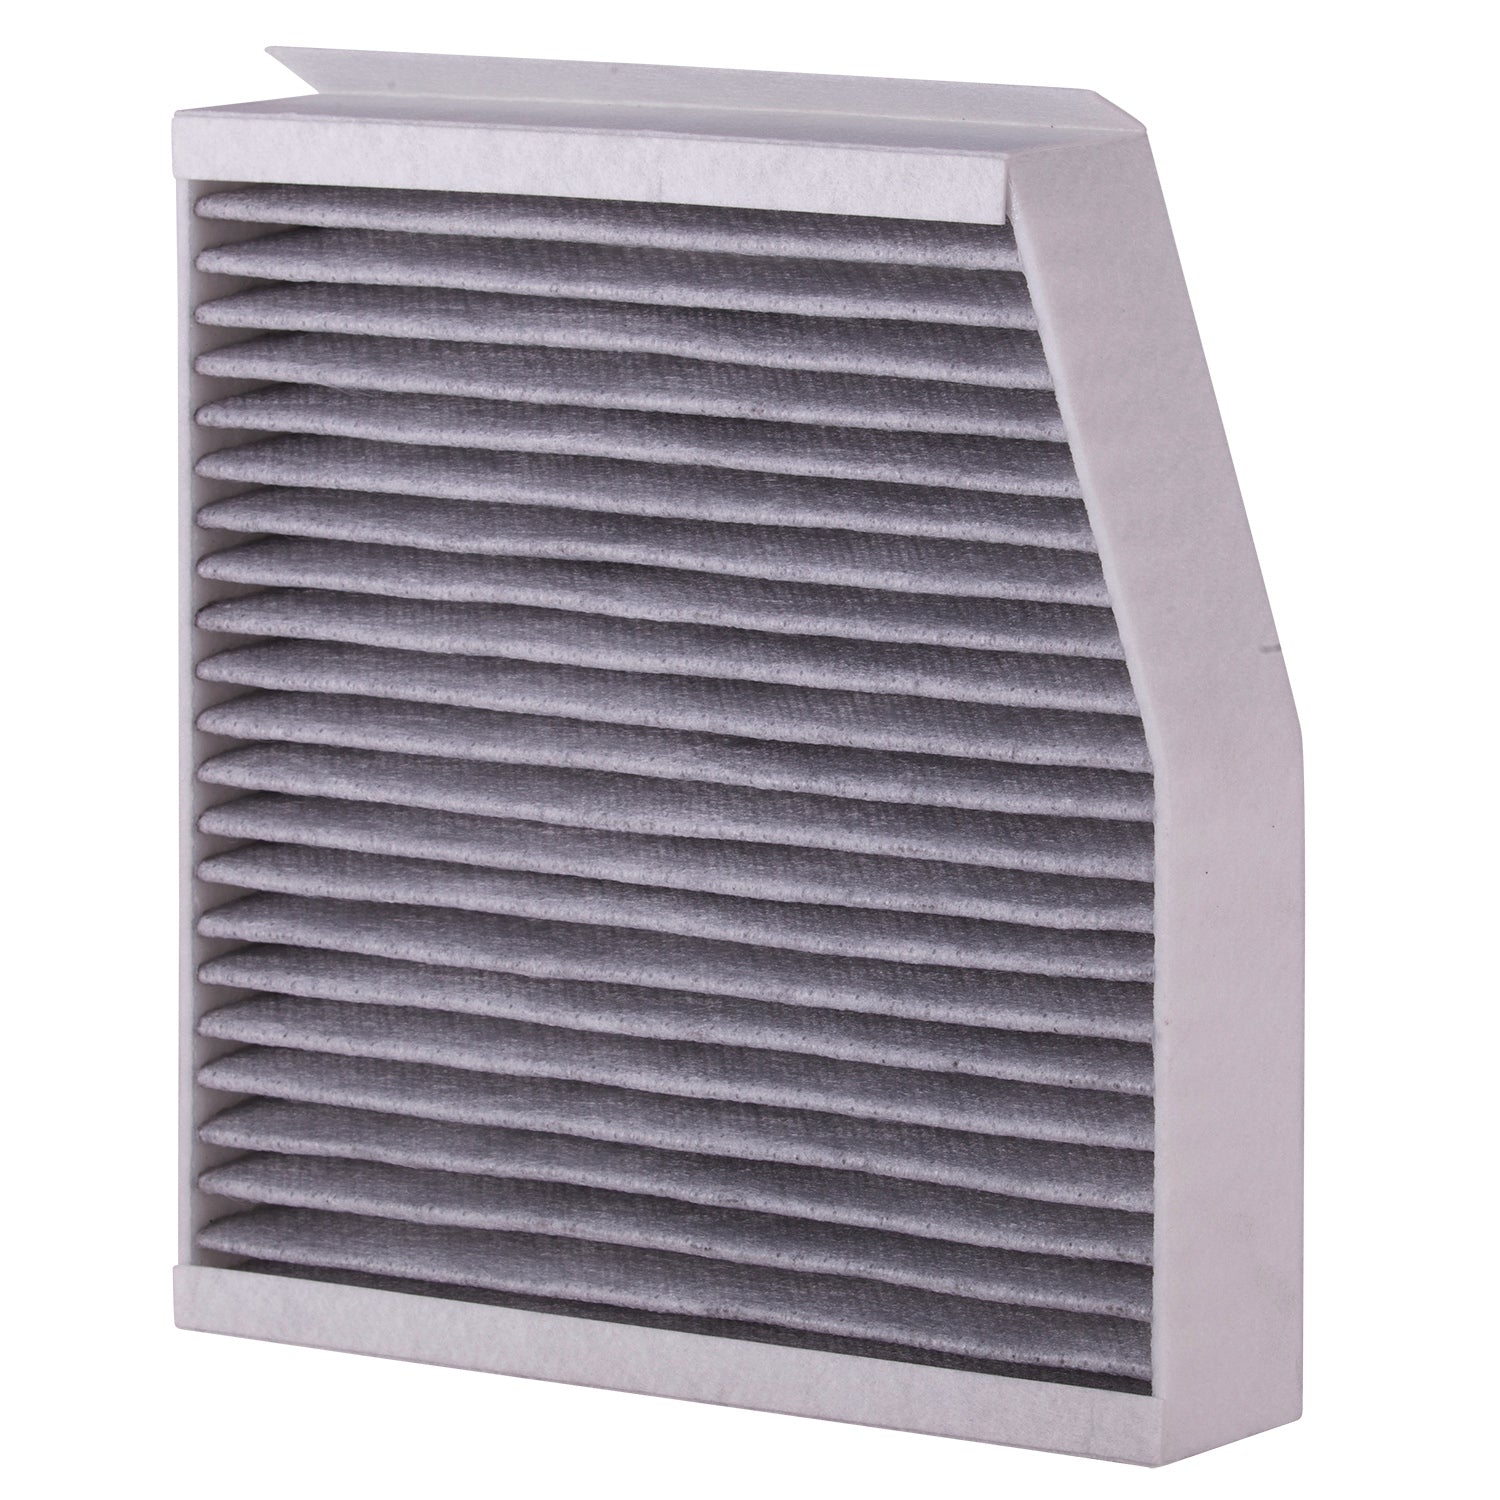 PUREFLOW 2016 Mercedes-Benz CLA250 Cabin Air Filter with Antibacterial Technology, PC99011X